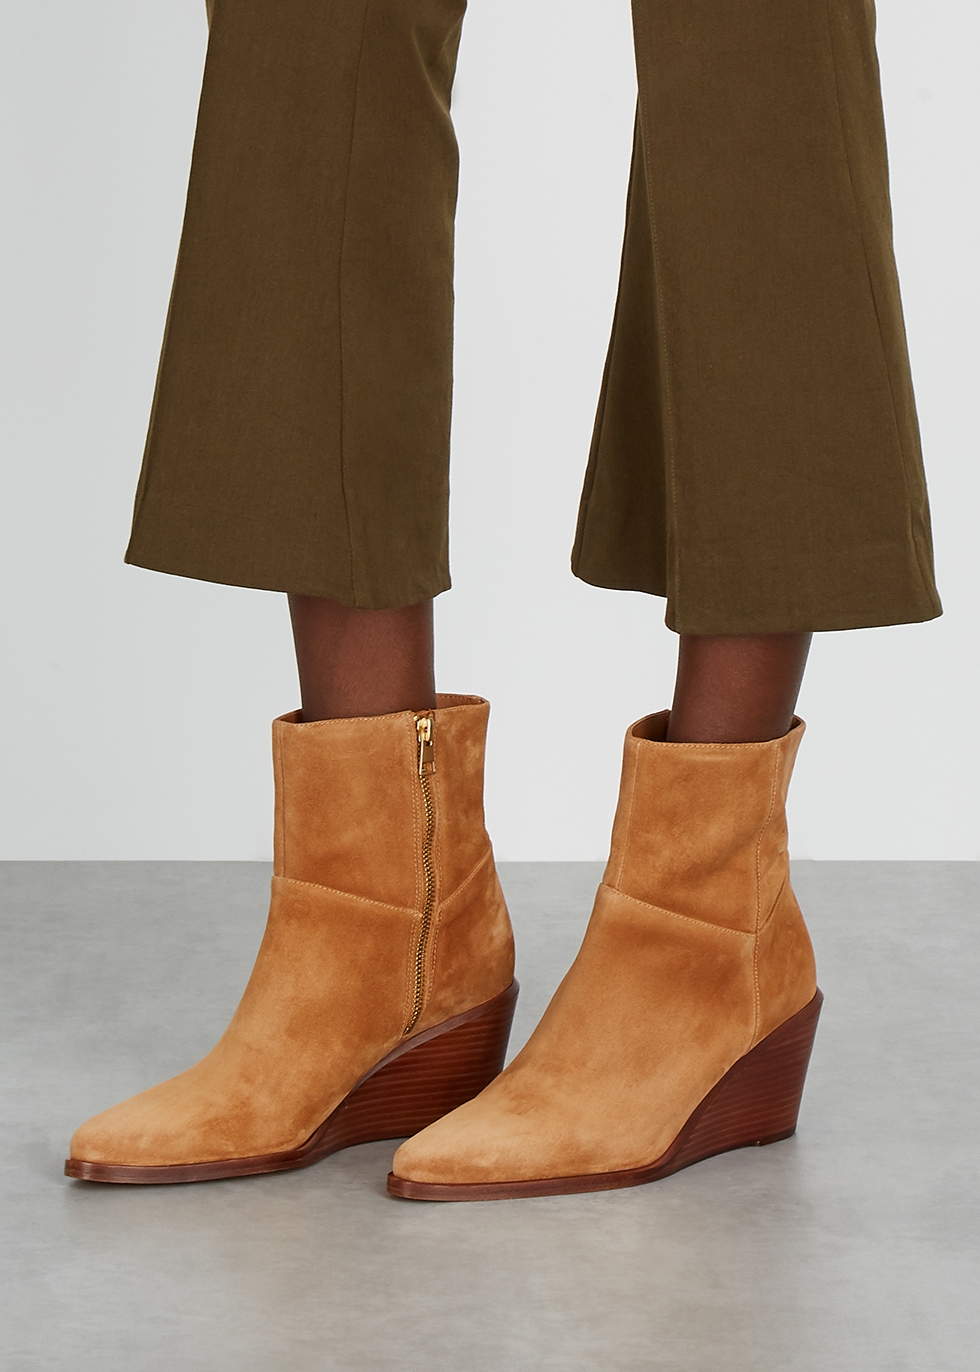 brown suede ankle boots